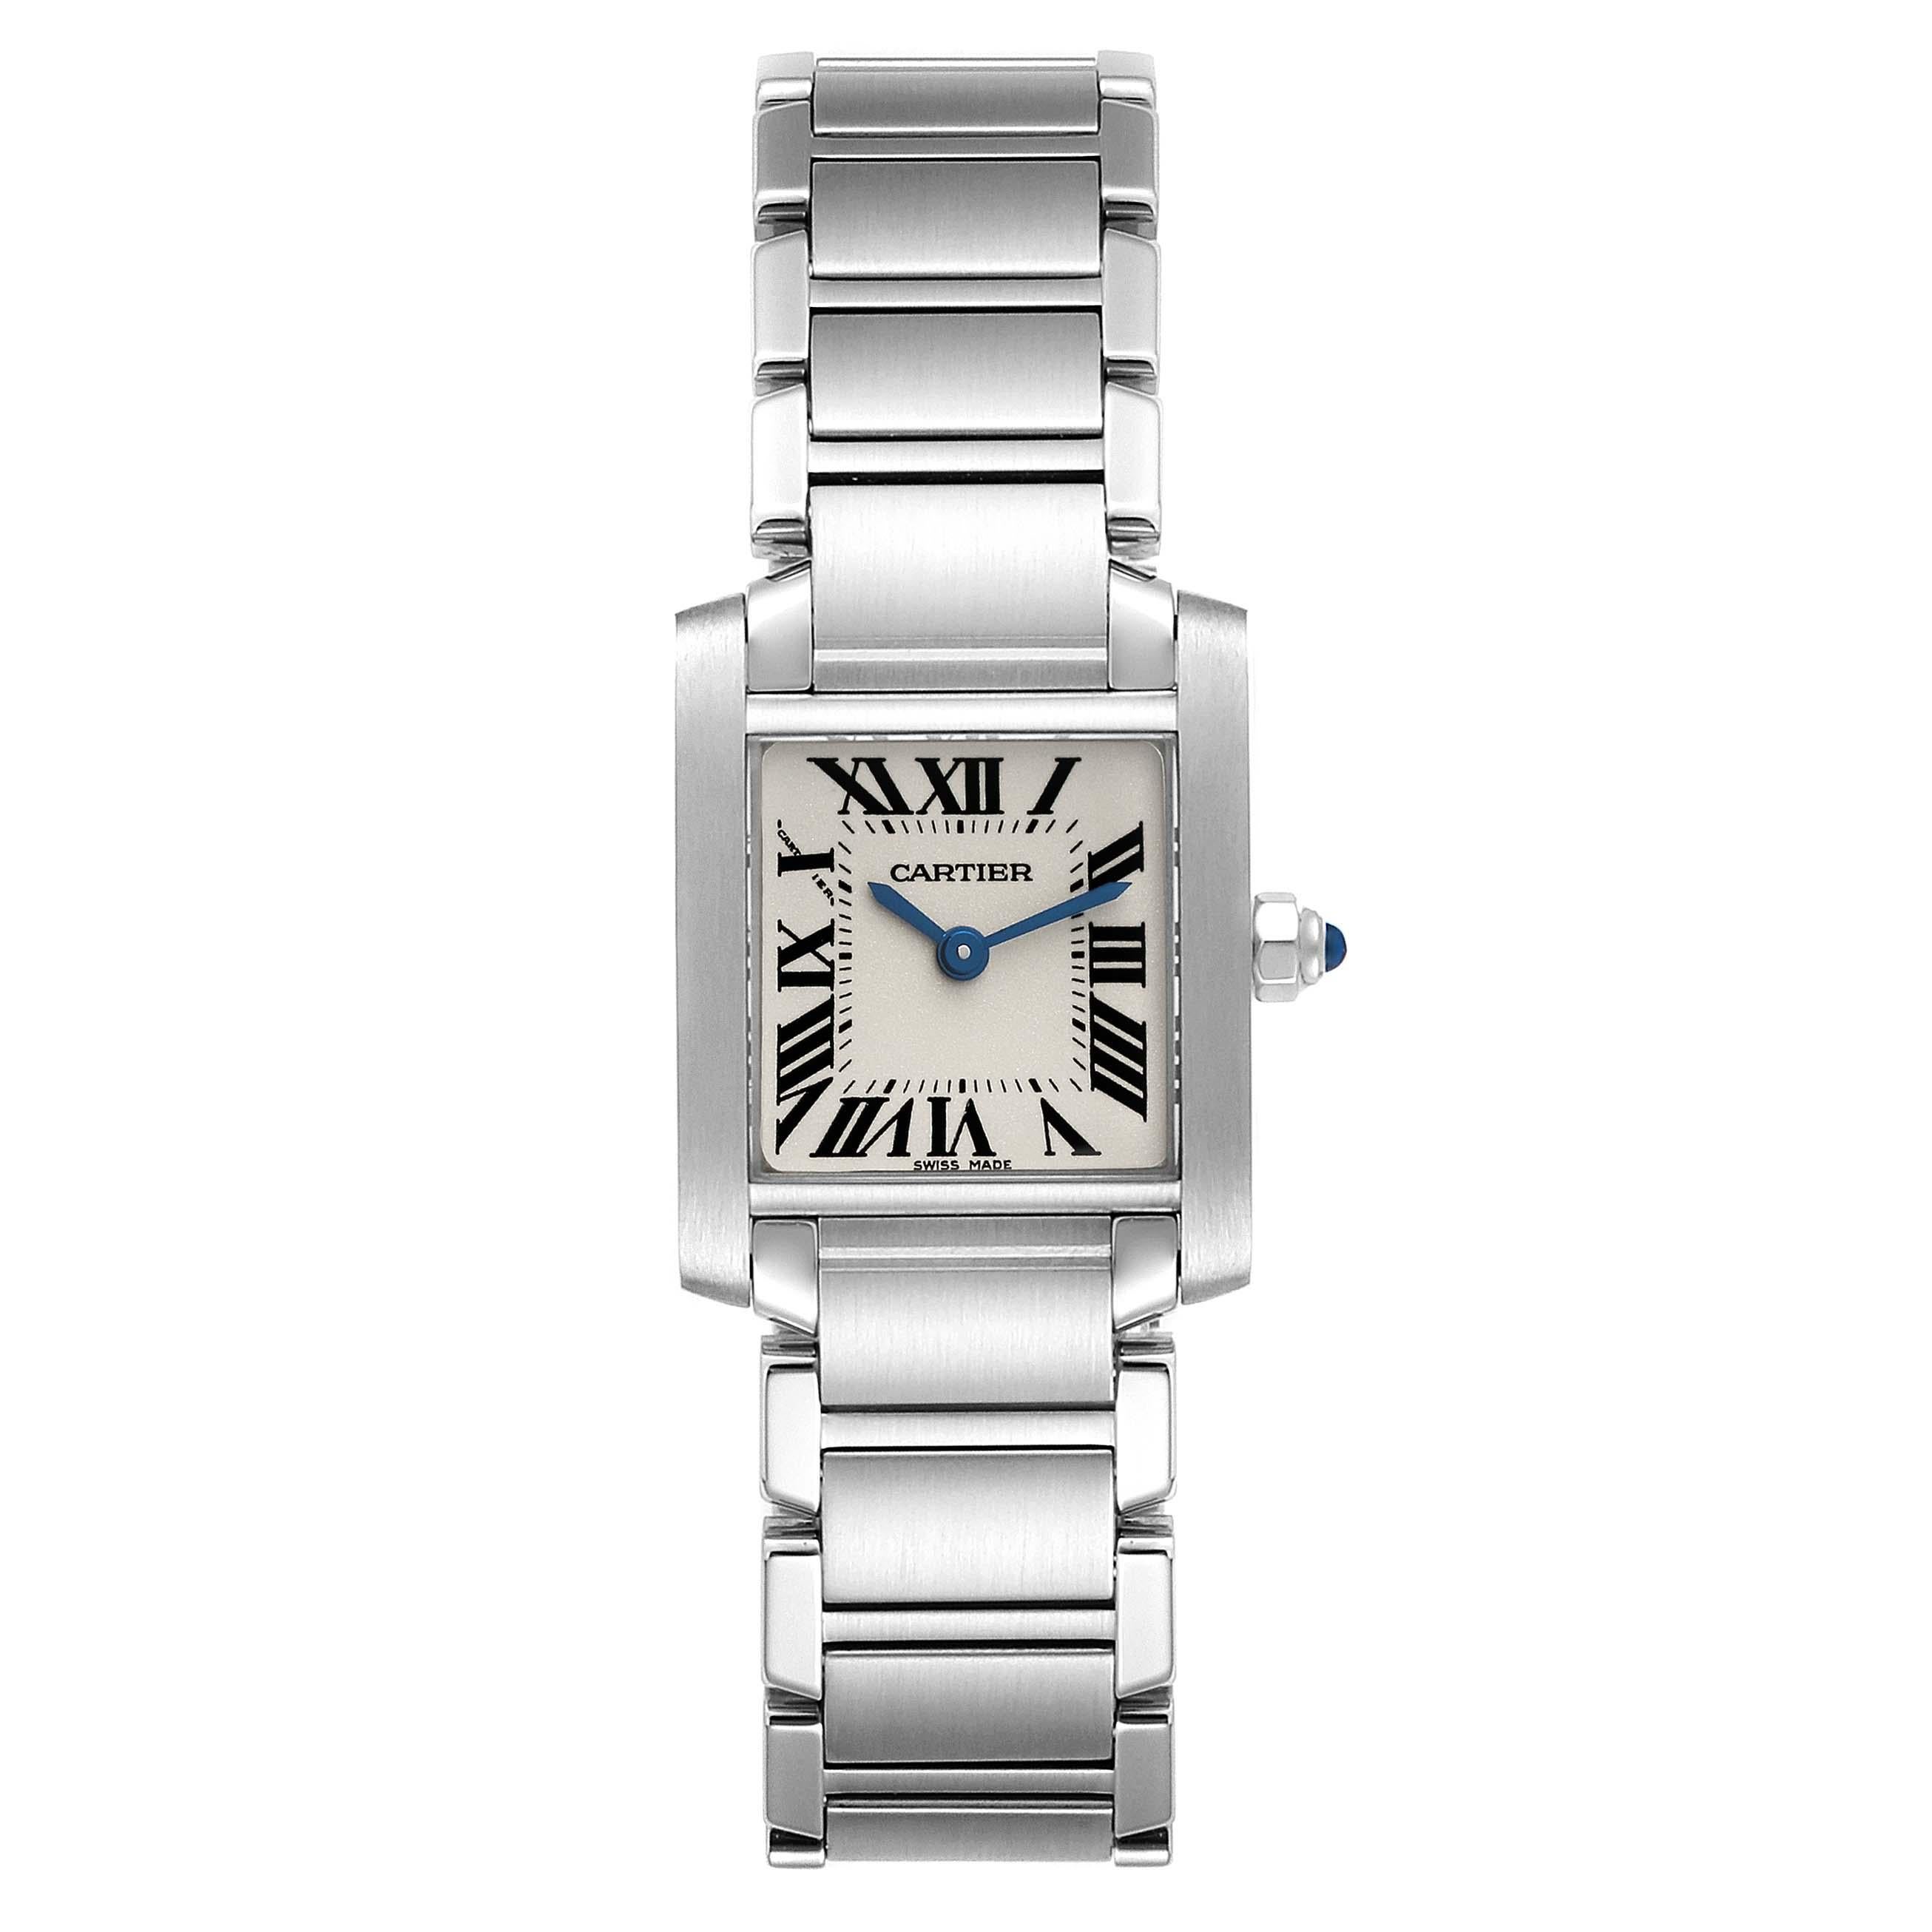 Cartier Tank Francaise Small Silver Dial Steel Ladies Watch W51008Q3. Quartz movement. Rectangular stainless steel 20.0 x 25.0 mm case. Octagonal crown set with a blue spinel cabochon. . Scratch resistant sapphire crystal. Silver opaline dial with